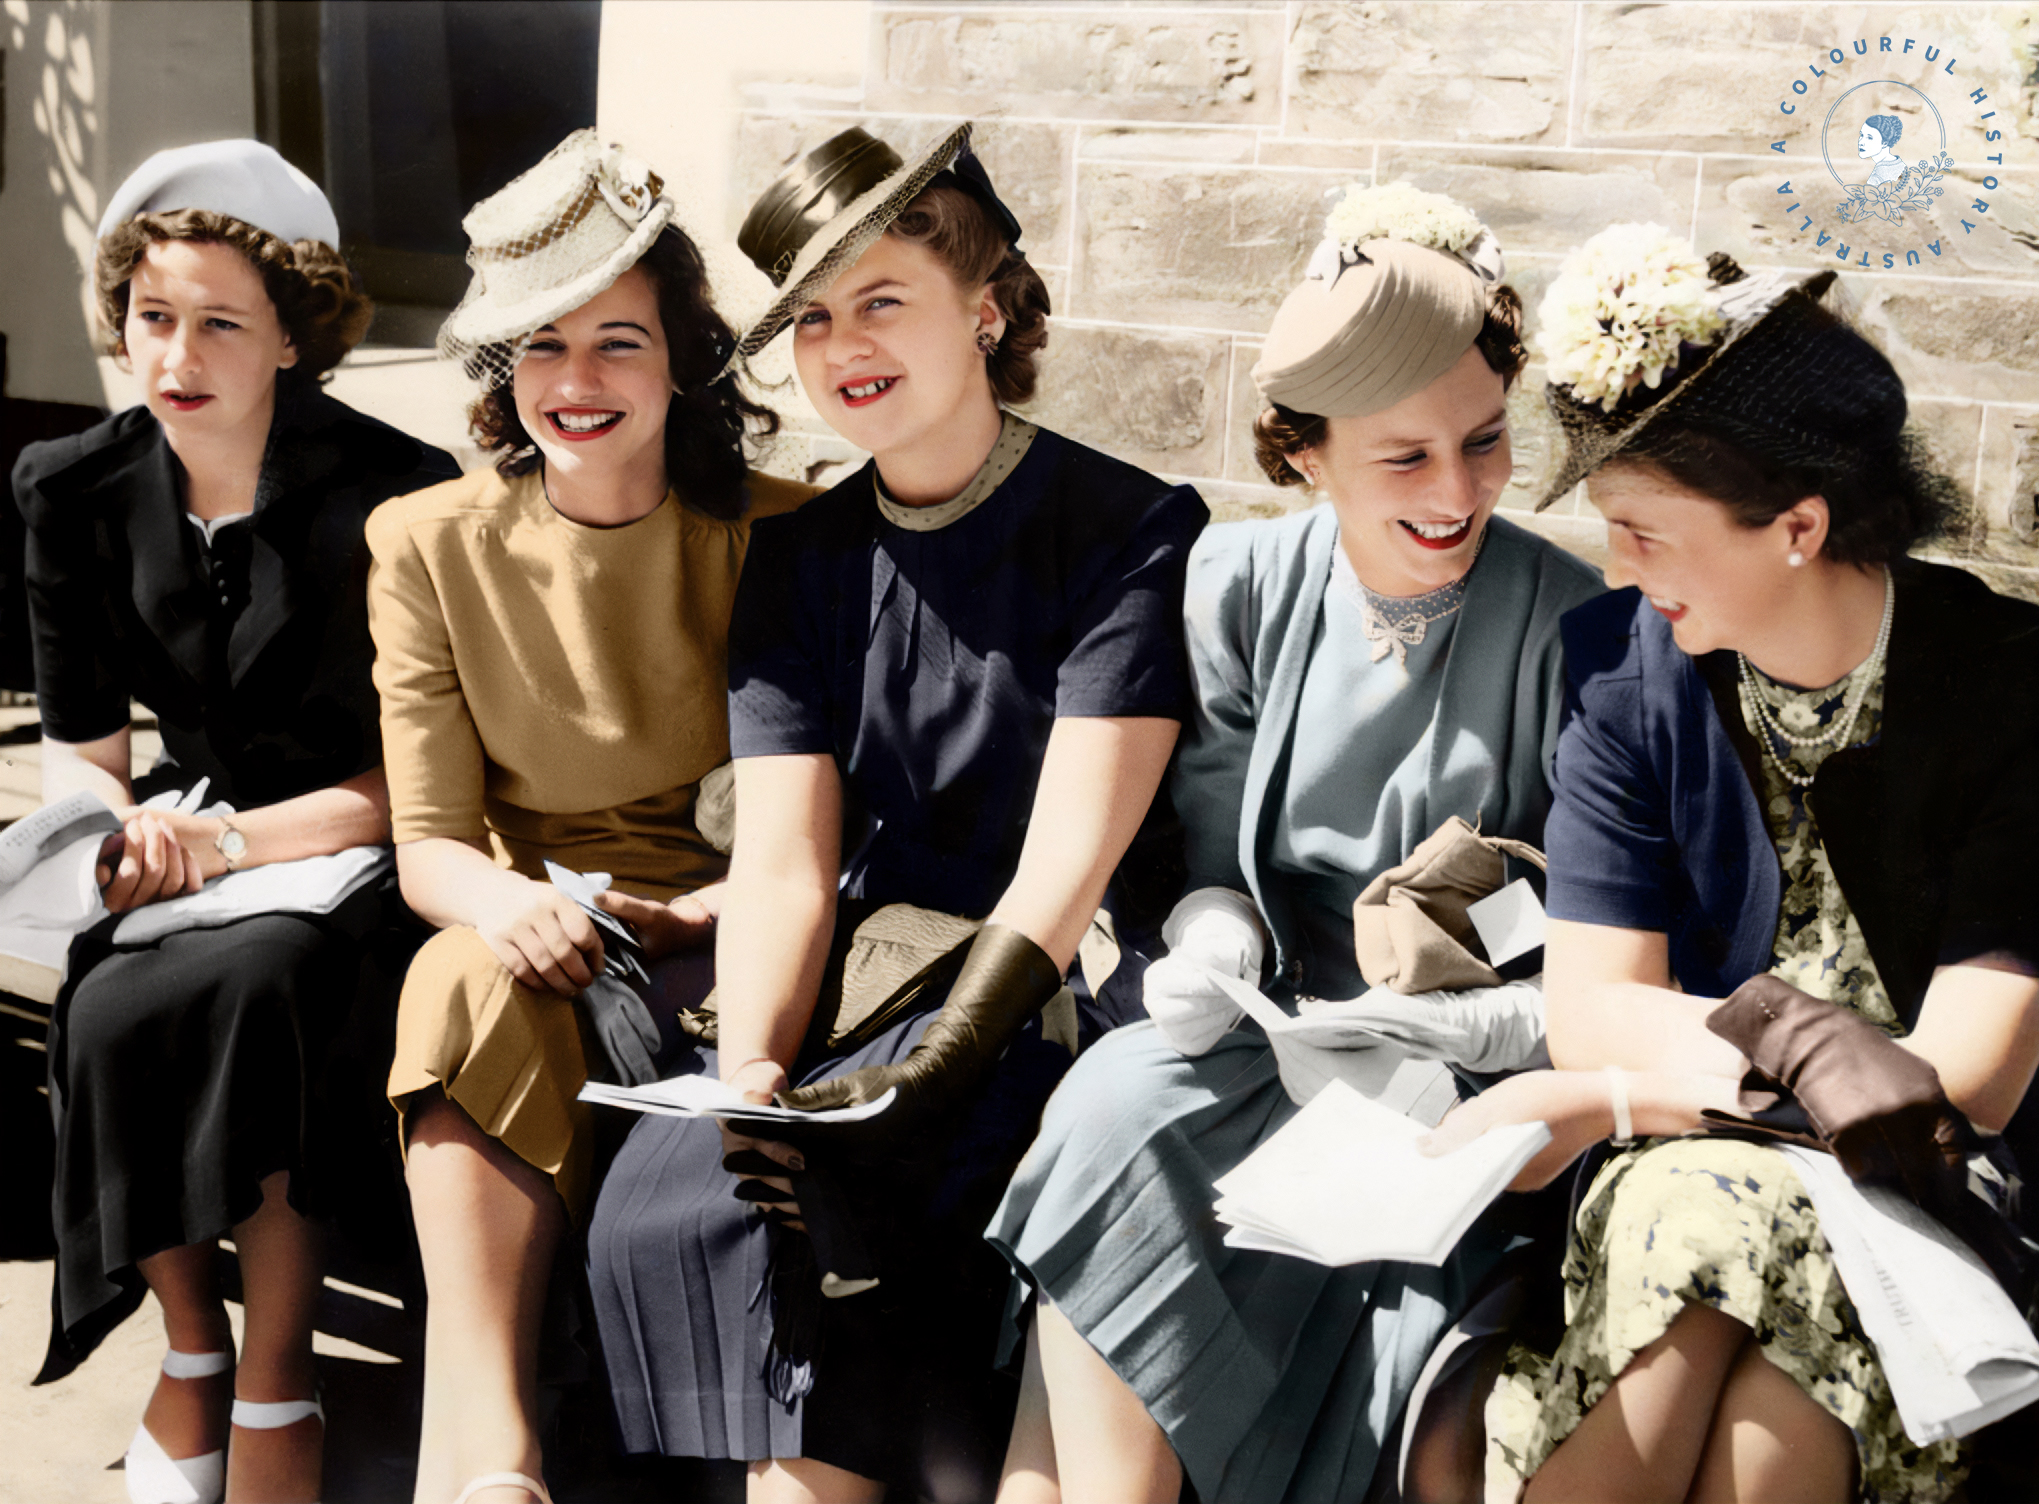 Five women dresses up for the races sitting on a bench smiling